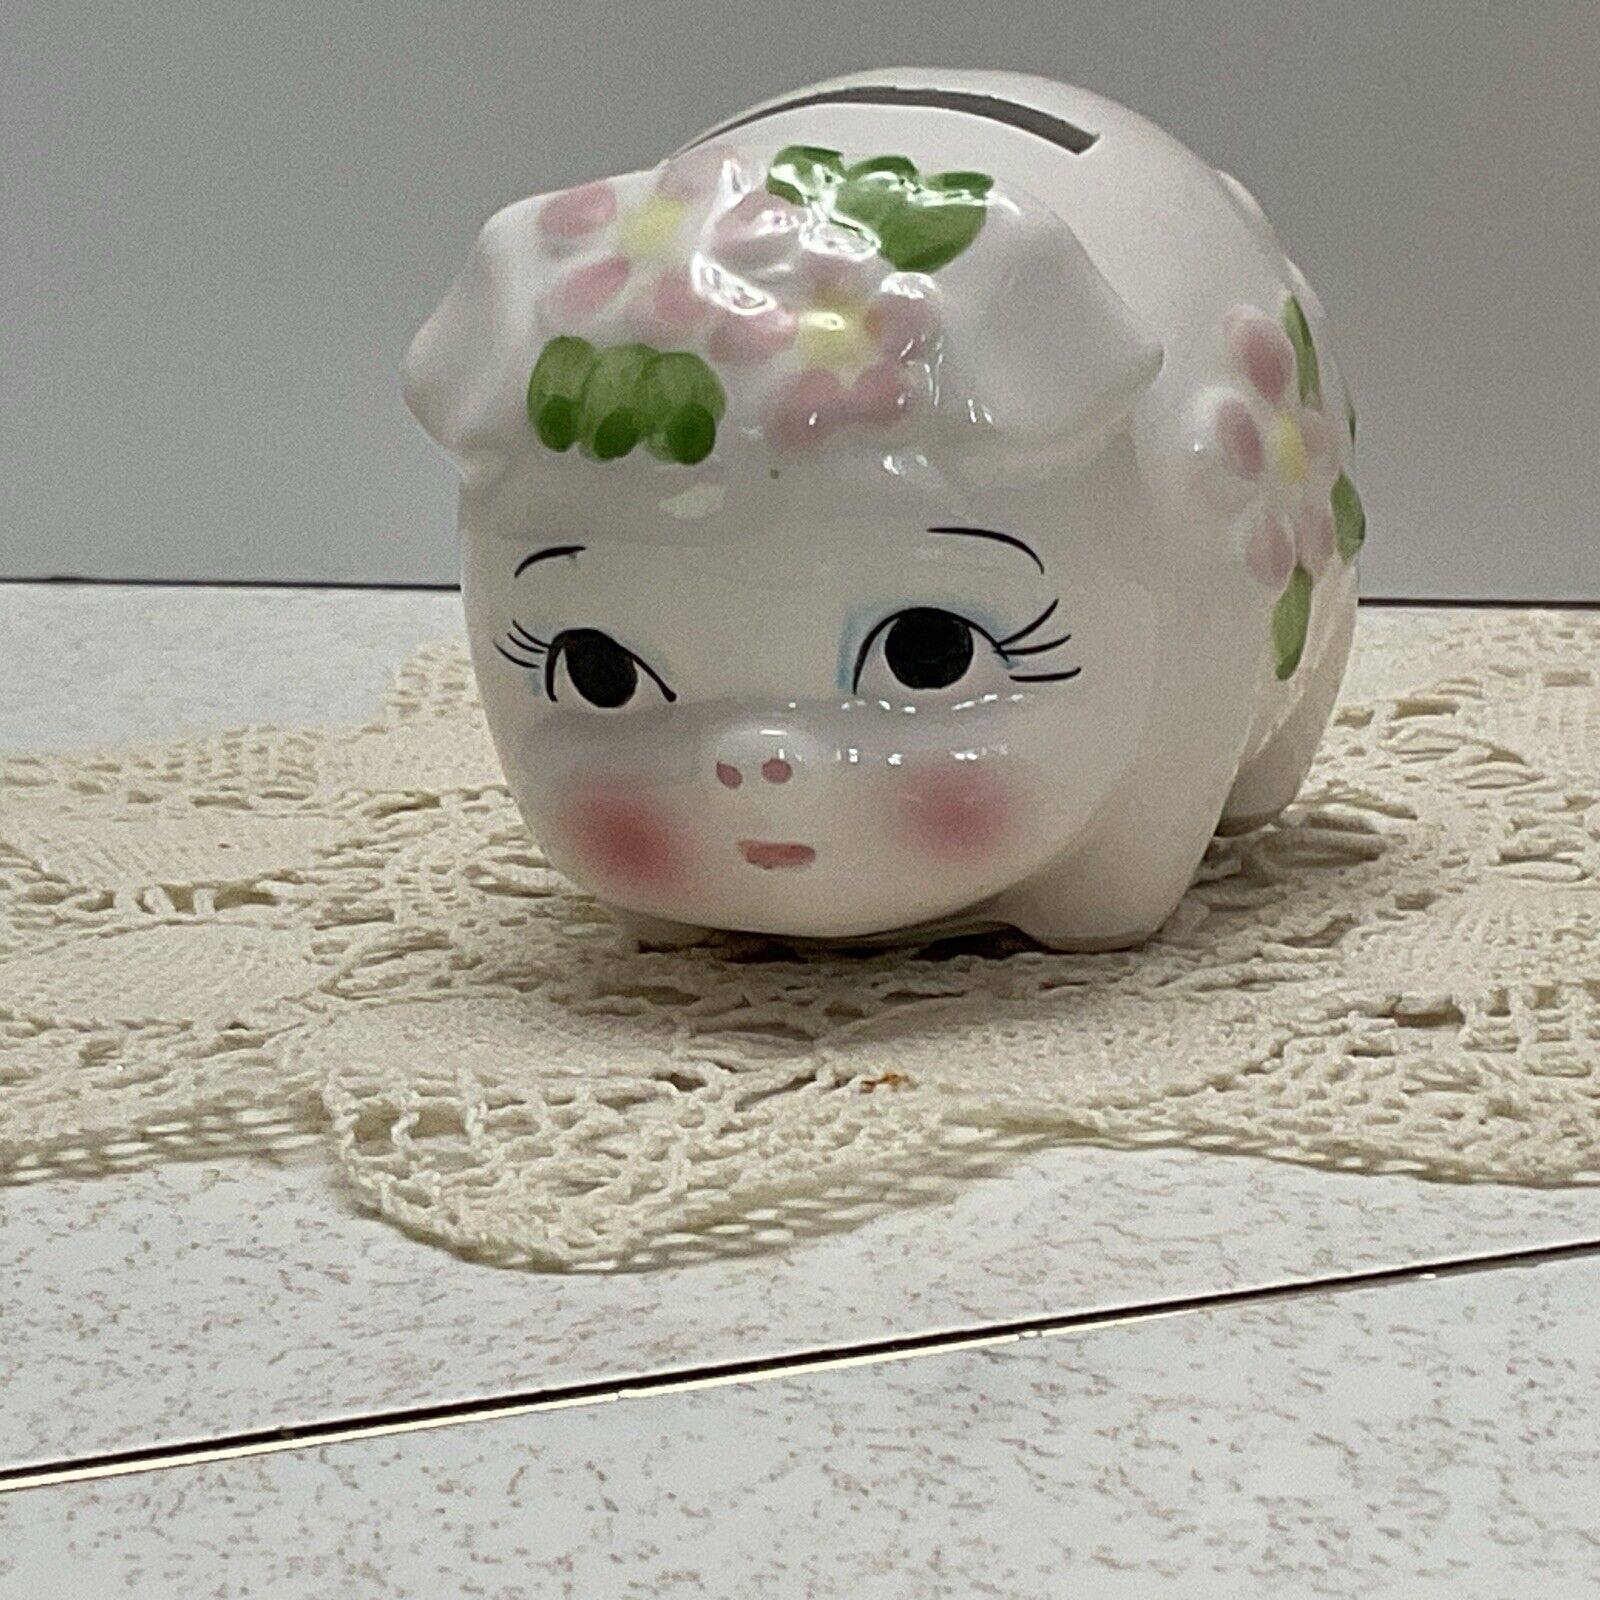 Vintage Ceramic Lefton  2.5” Pink Piggy Bank with Flowers and Stopper  Tiny/Cute